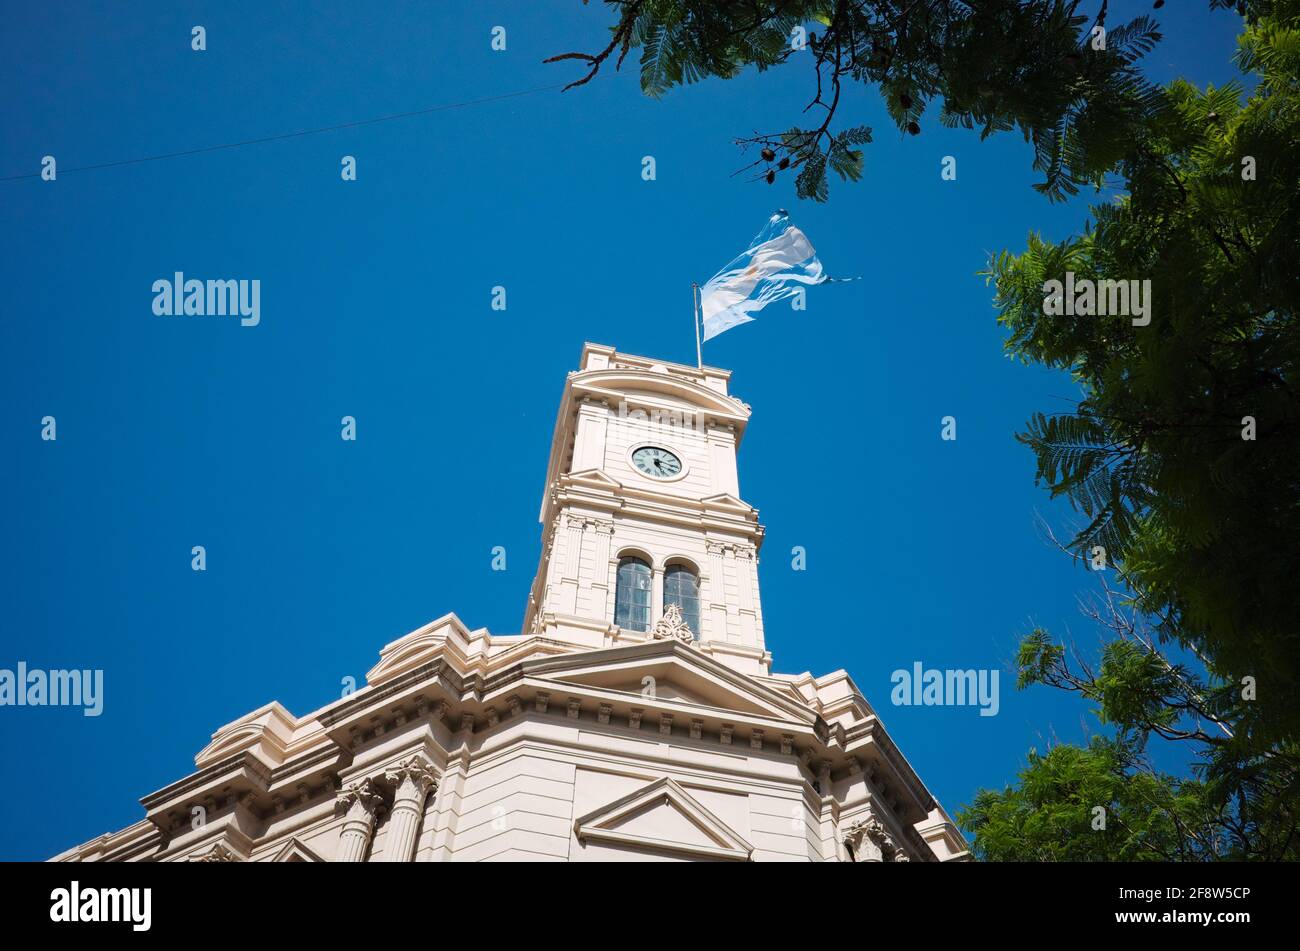 Flag of Argentina waving over clock tower against blue sky on the building of Legislature of the Province of Cordoba. Historic building in the center Stock Photo